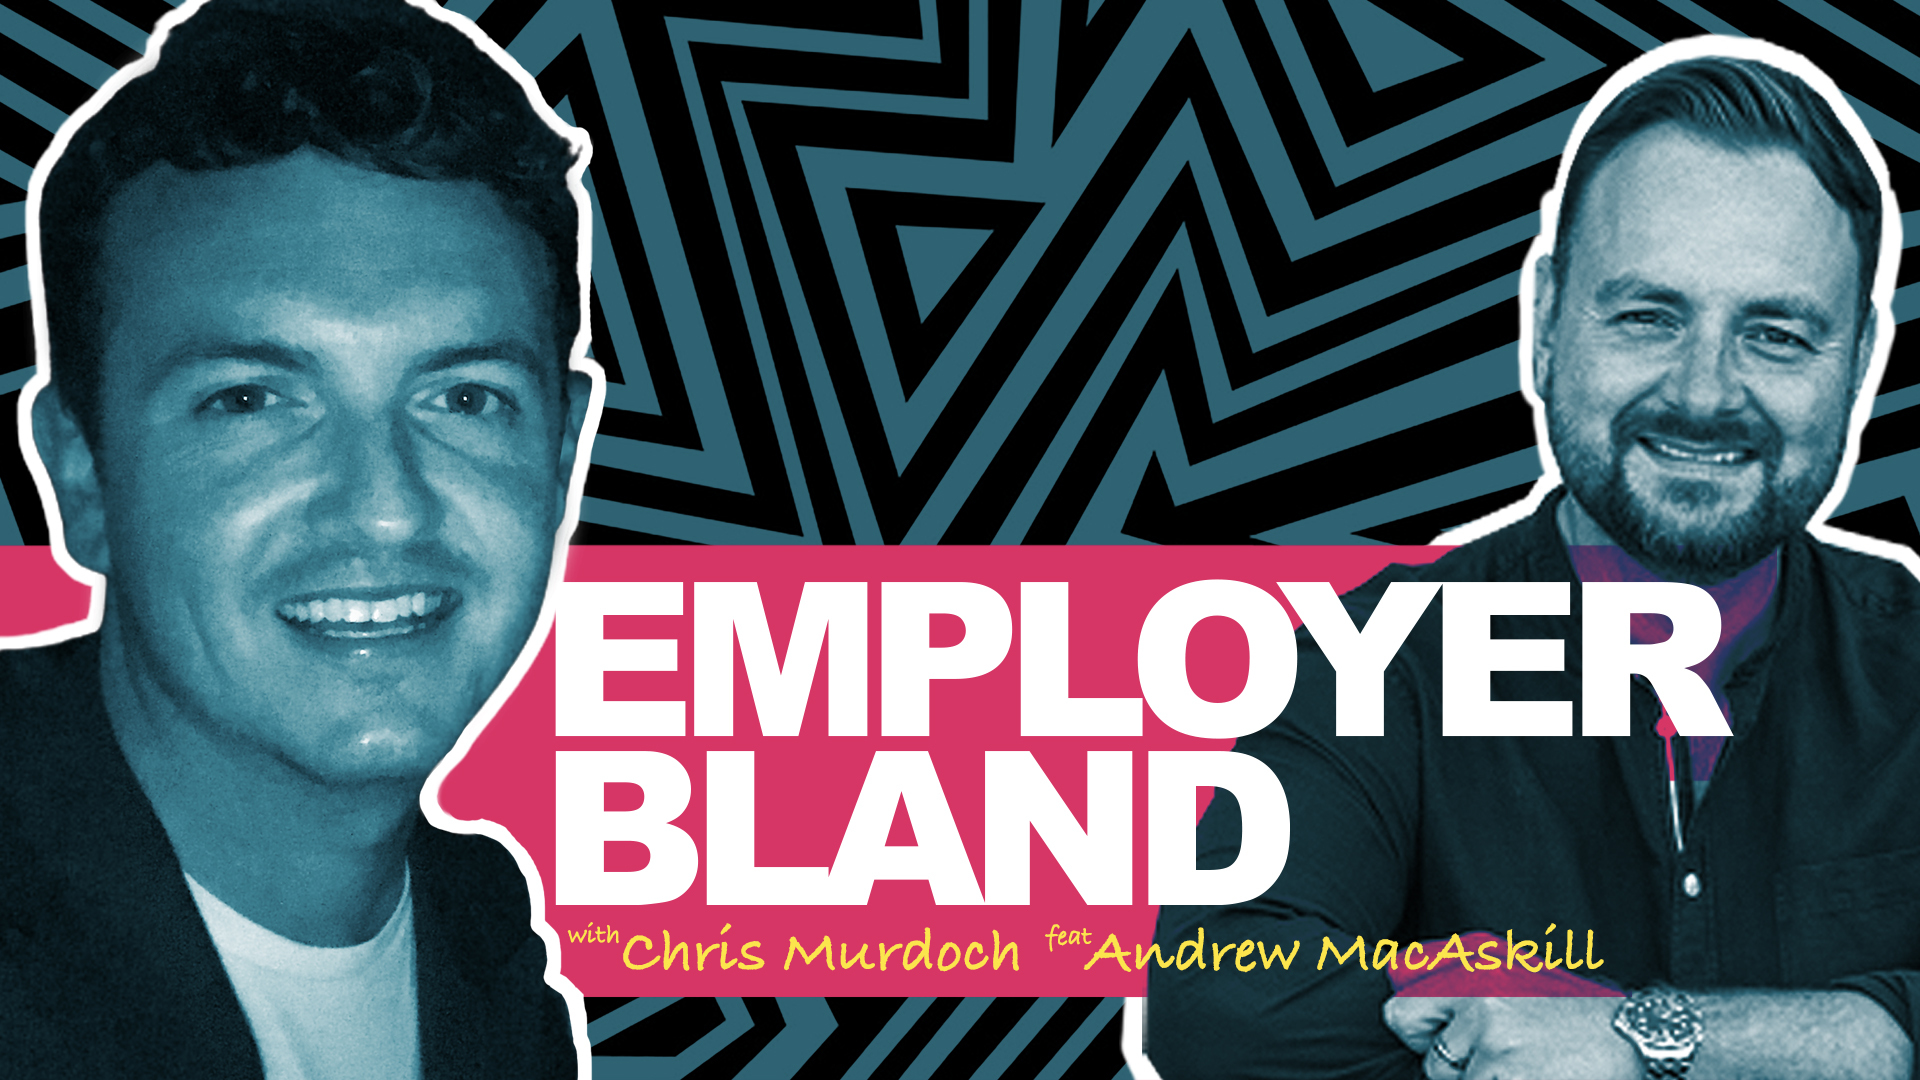 Employee Experience - Interview to Off-boarding (with Andrew MacAskill)